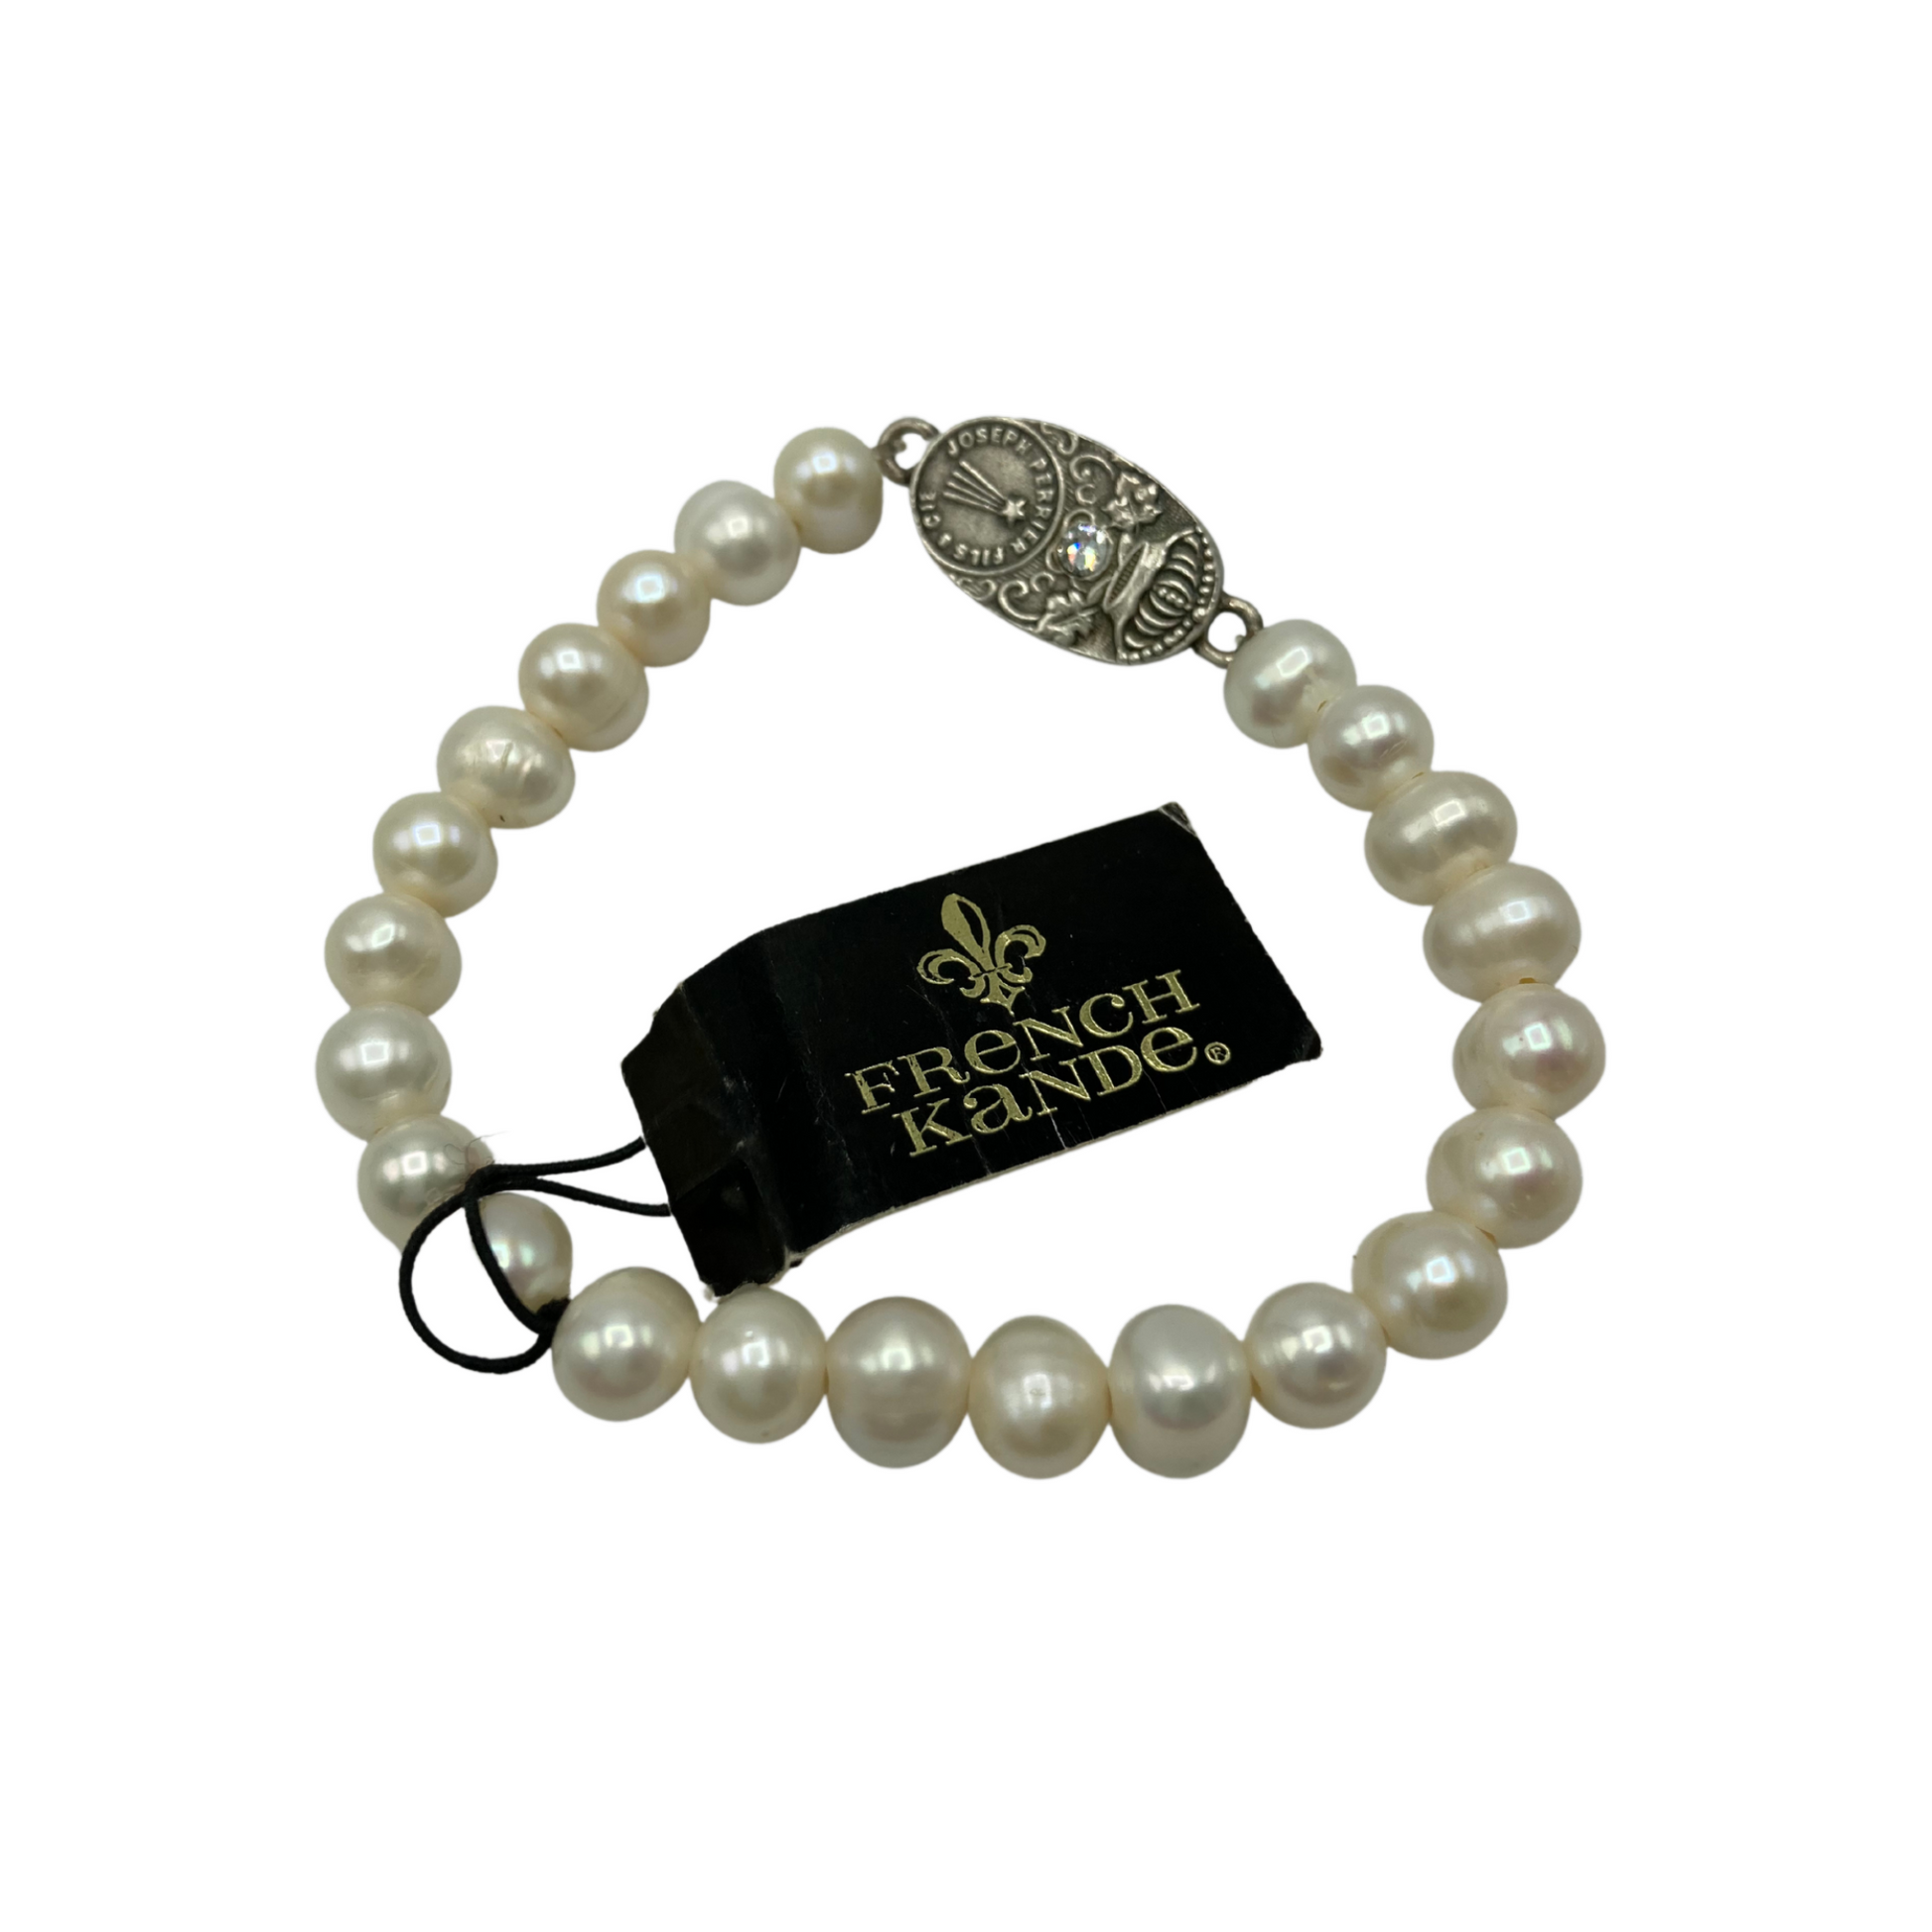 A beaded, pearl bracelet with an engraved silver medallion in the string.